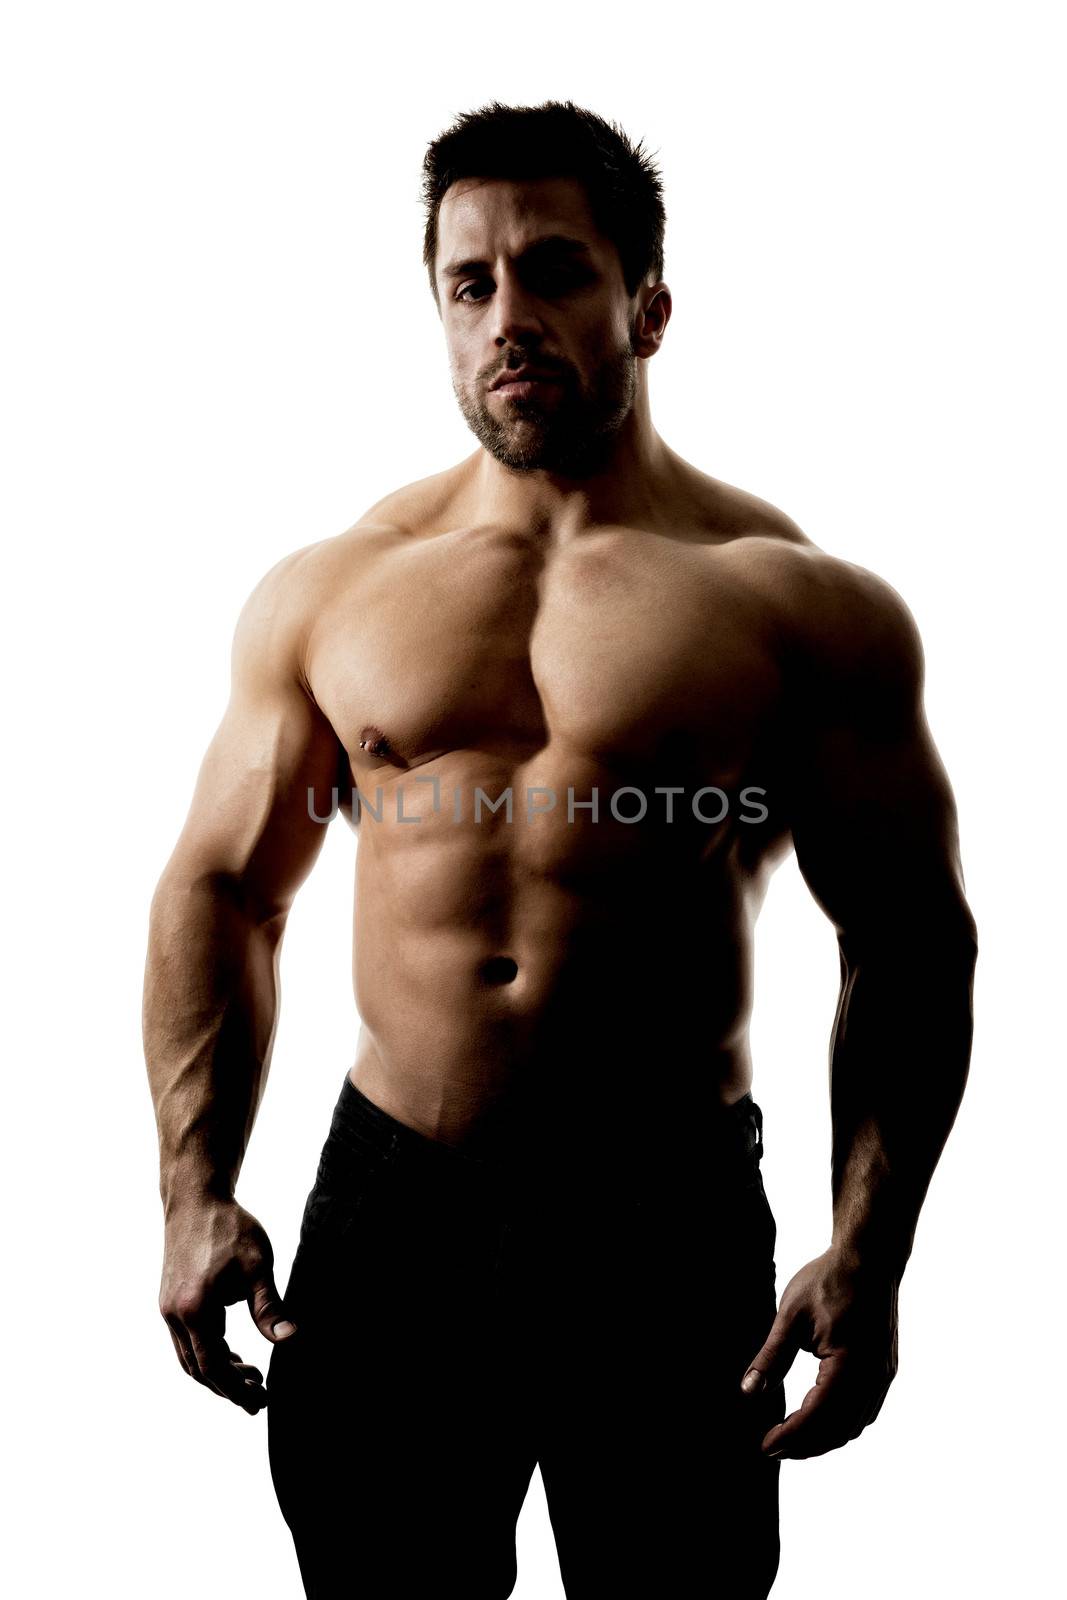 A handsome muscular sports man hard lit with deep shadows isolated on a white background